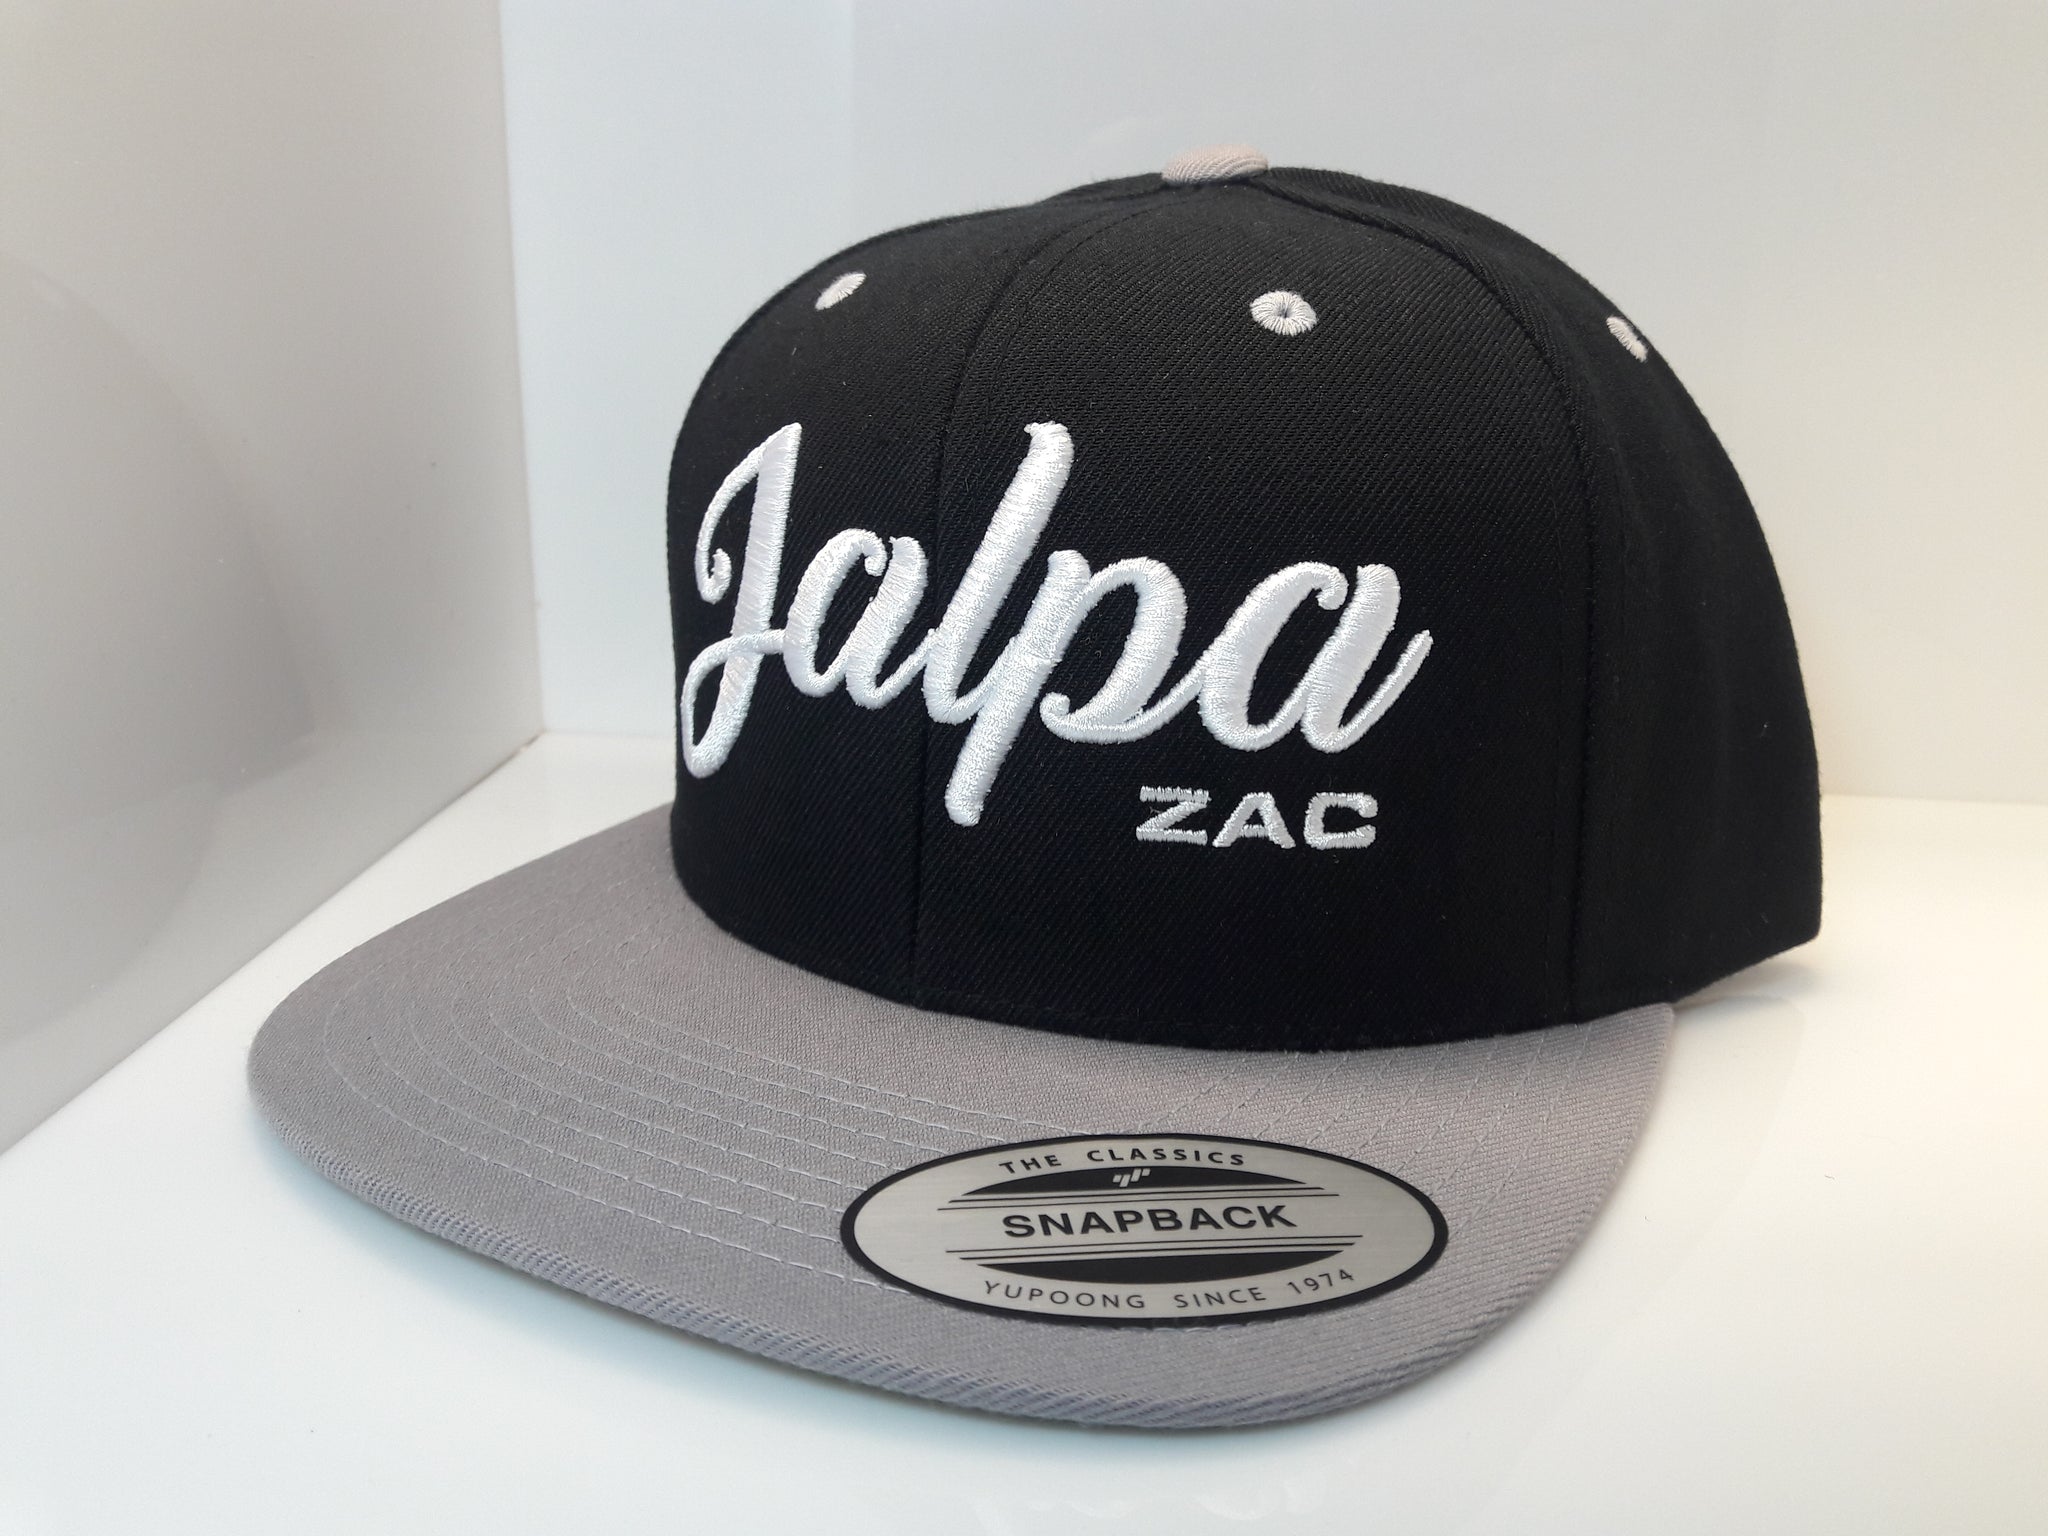 3D Embroidered Black and Silver Jalpa Zac Flexfit - Classic Snapback Two-Tone Cap